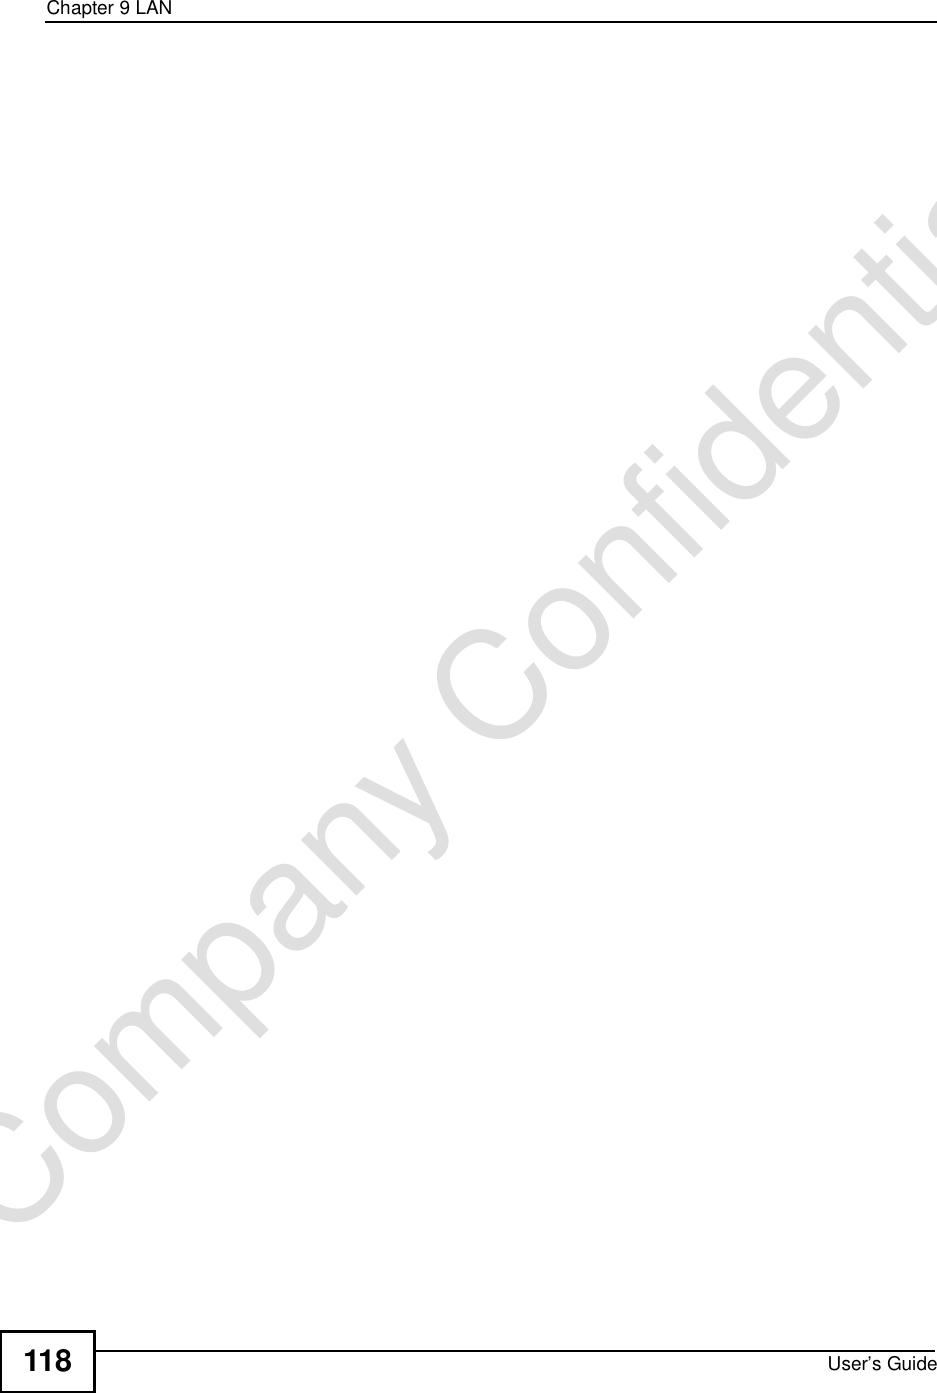 Chapter 9LANUser’s Guide118Company Confidential